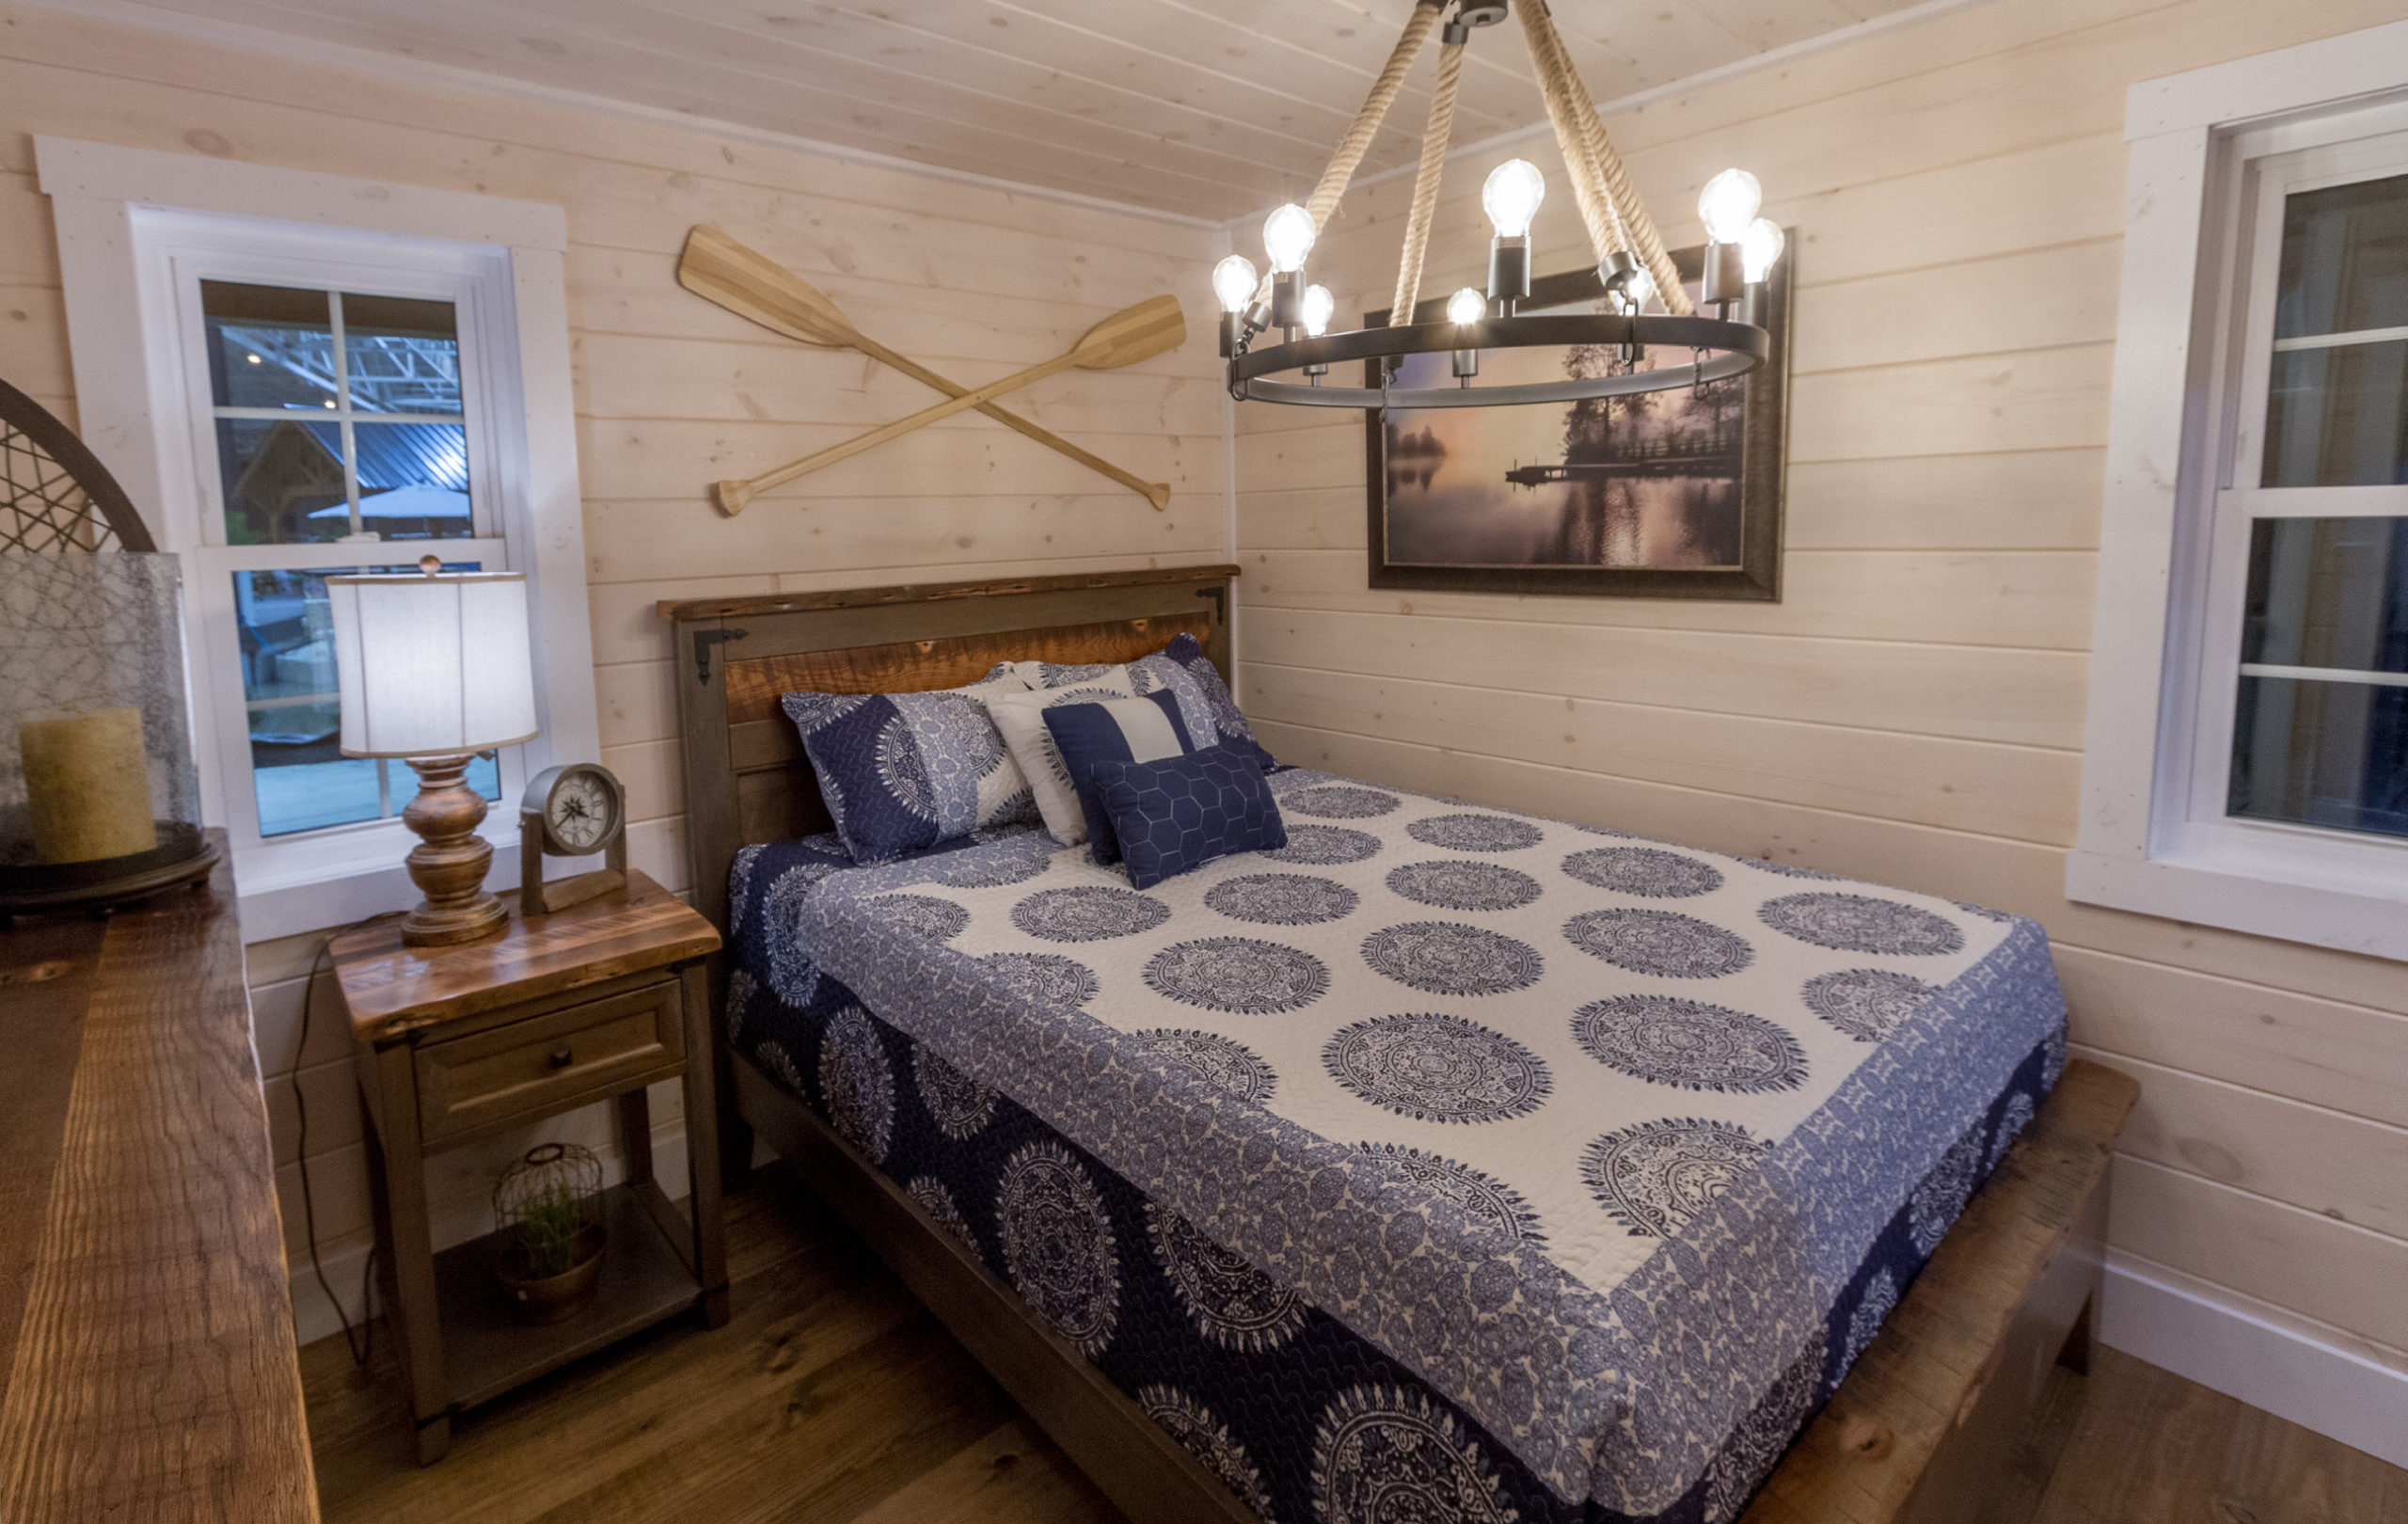 Bedroom of Rocky Ridge Cabin by Weaver Barns of Sugarcreek, Ohio. Amish Country Cabin Builders in Central Ohio.